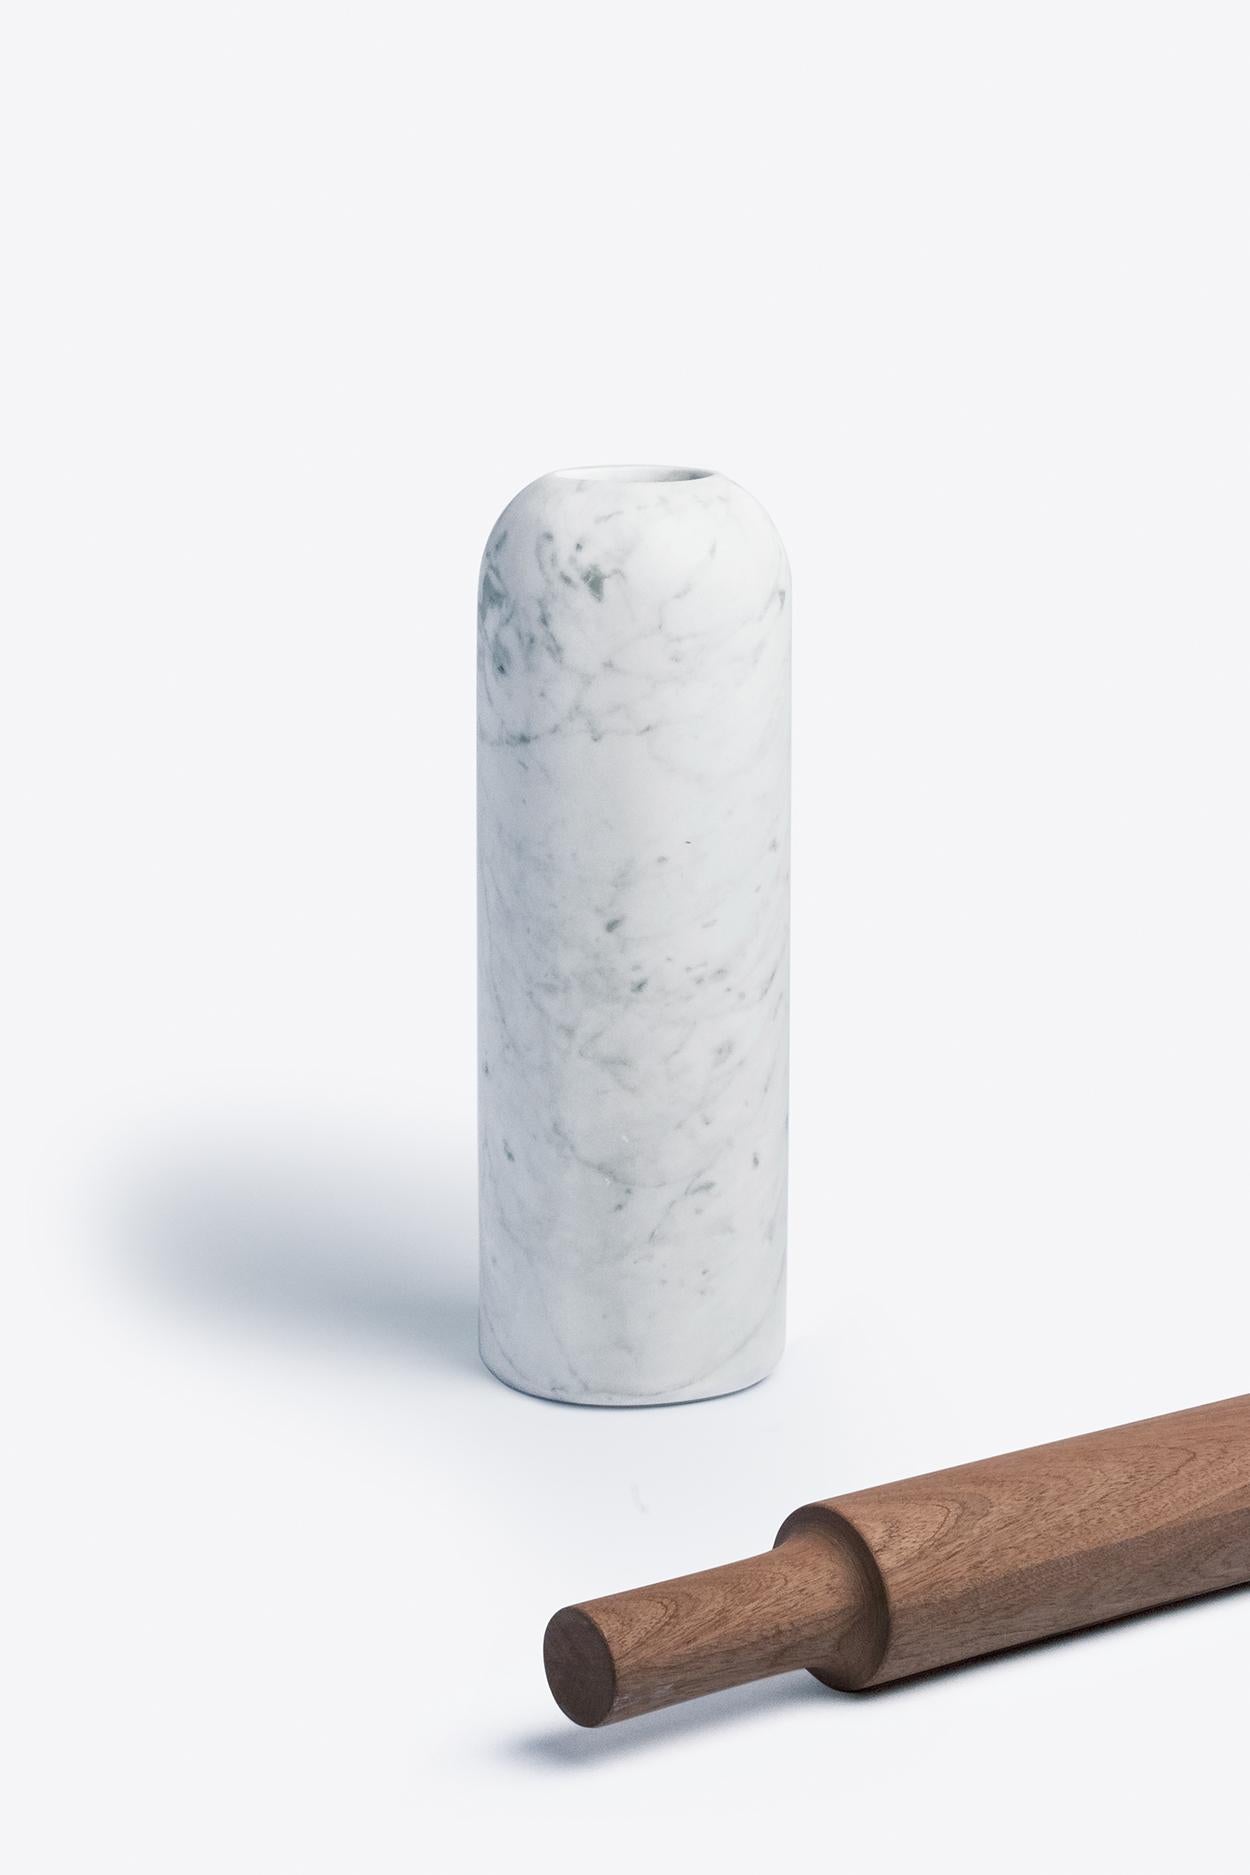 Function meets art in this ordinary kitchen utensil that is transformed in a sculptural object.
Evoking the silhouette of a classic glass bottle, this piece features an elegant combination of materials: the slender wooden body of the rolling pin